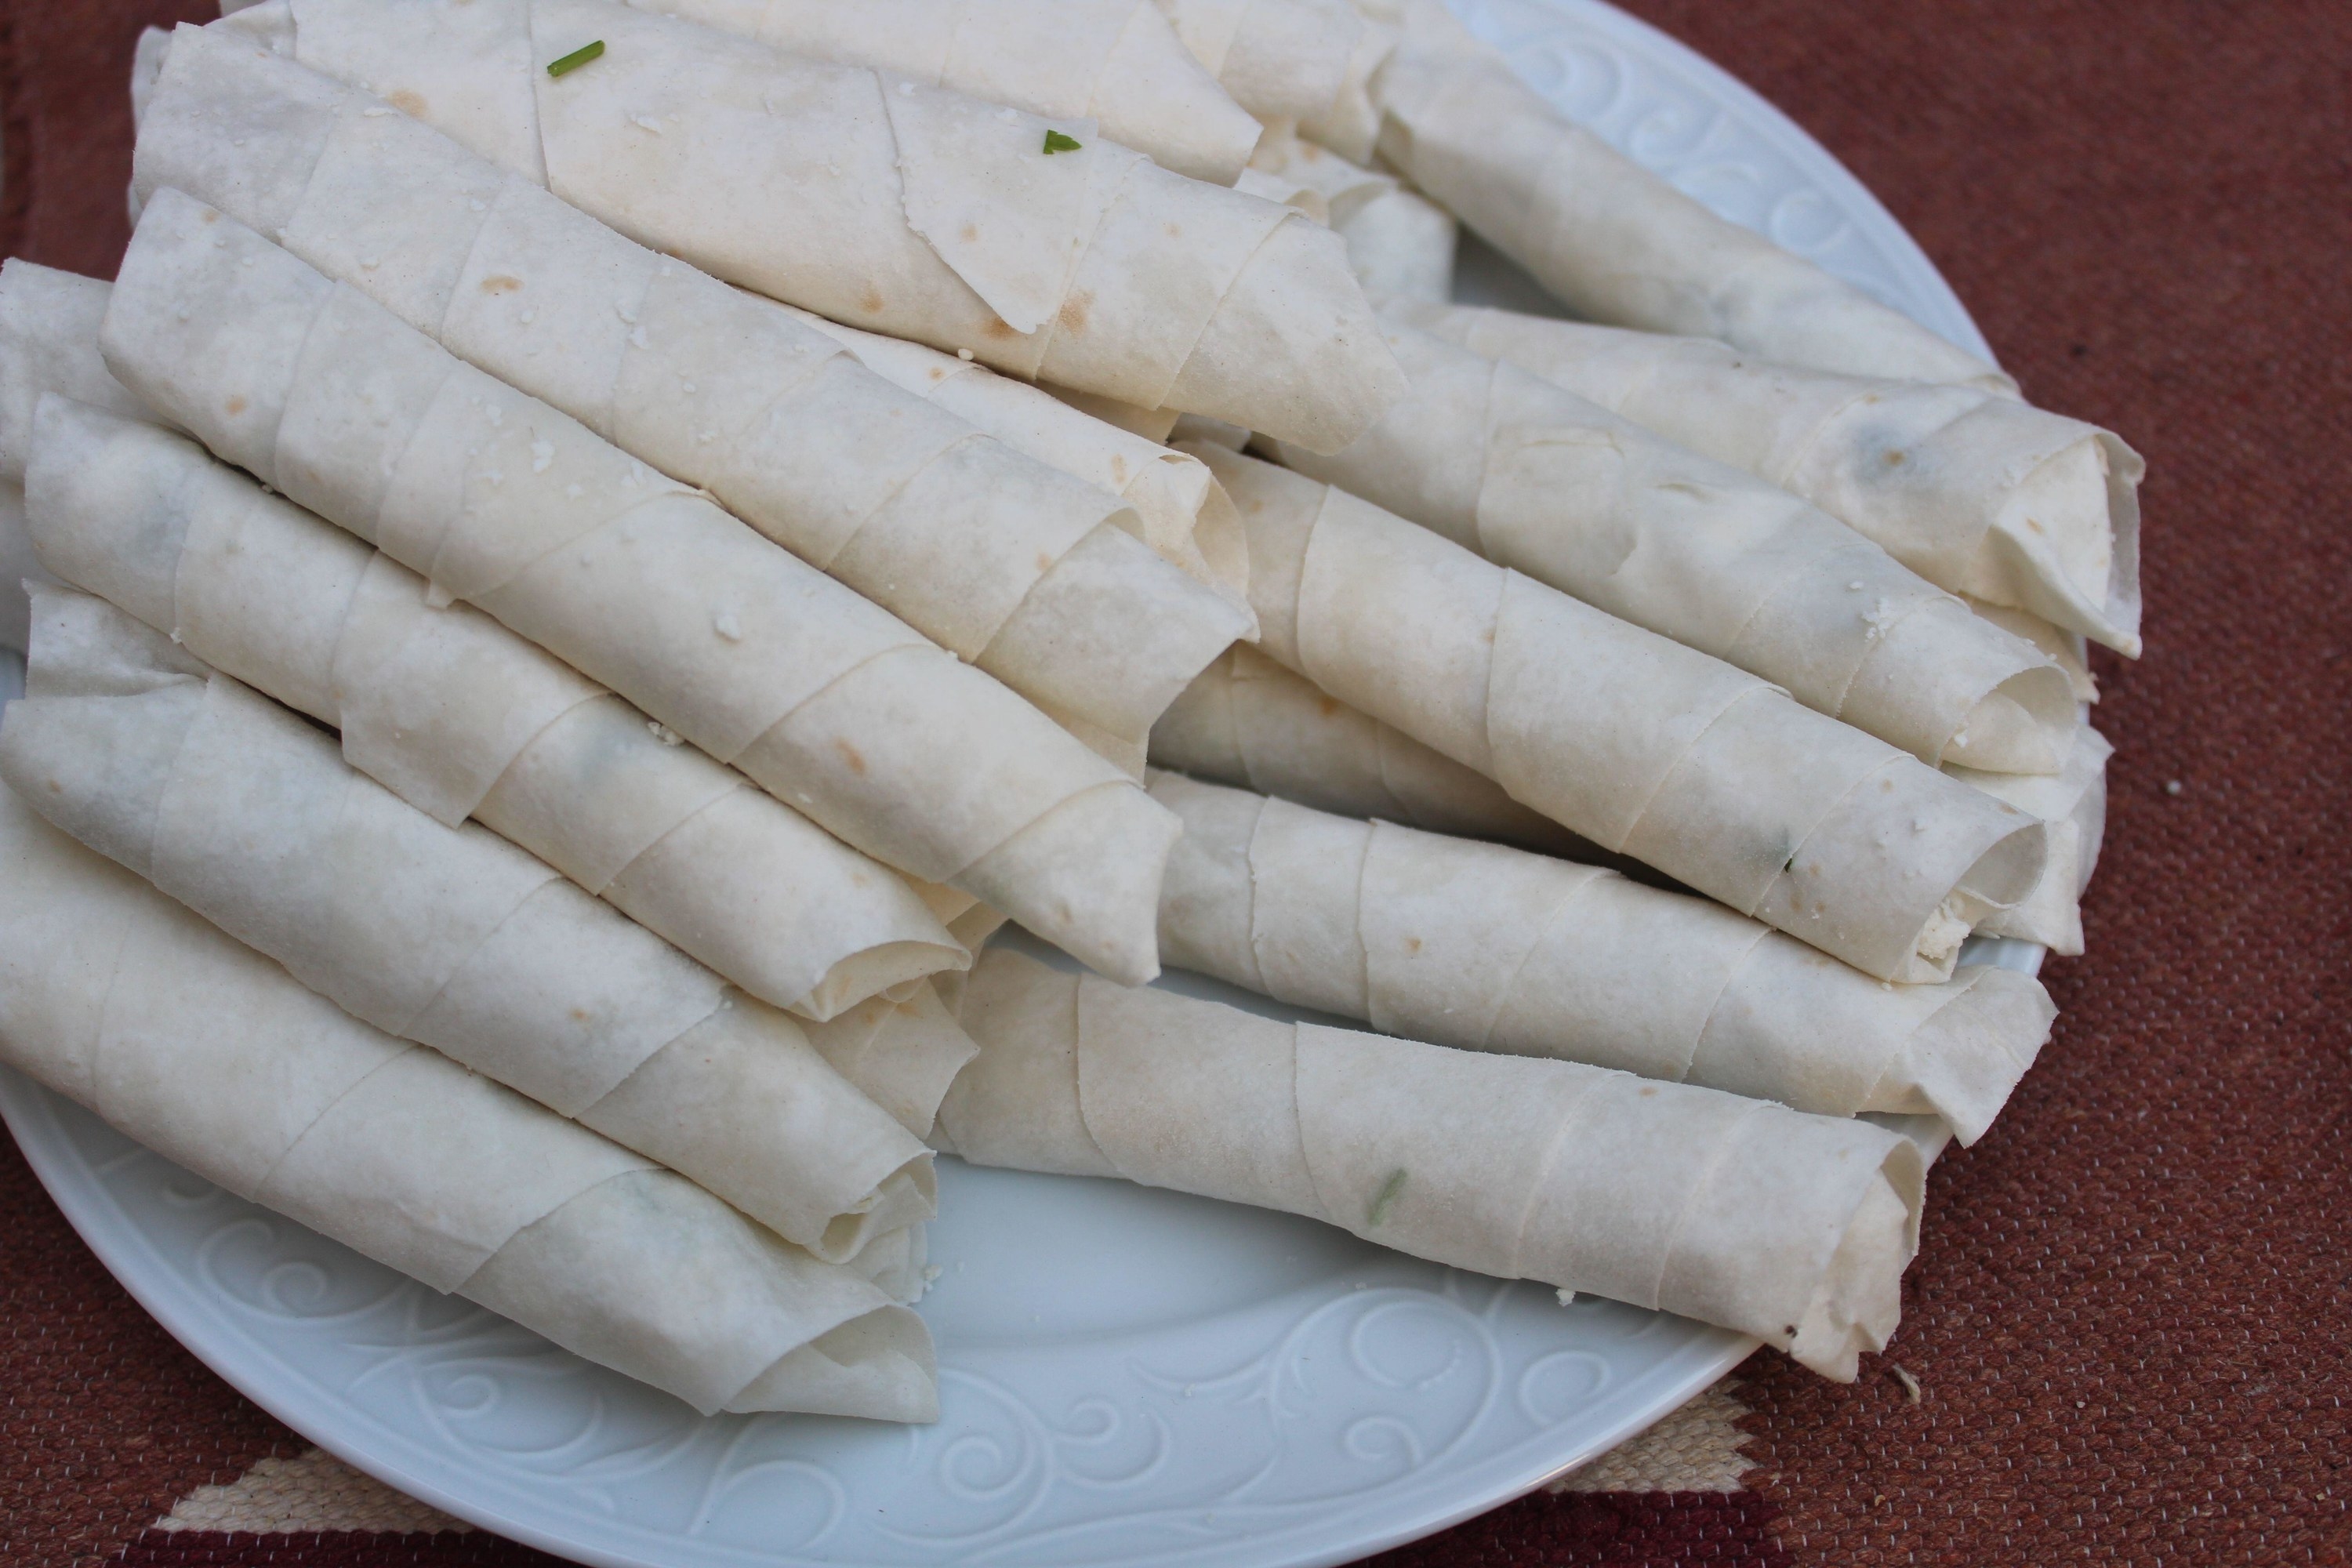 Raw cigarette shaped rolls and stuffed with meat, cheese, parsley, purslane or dill